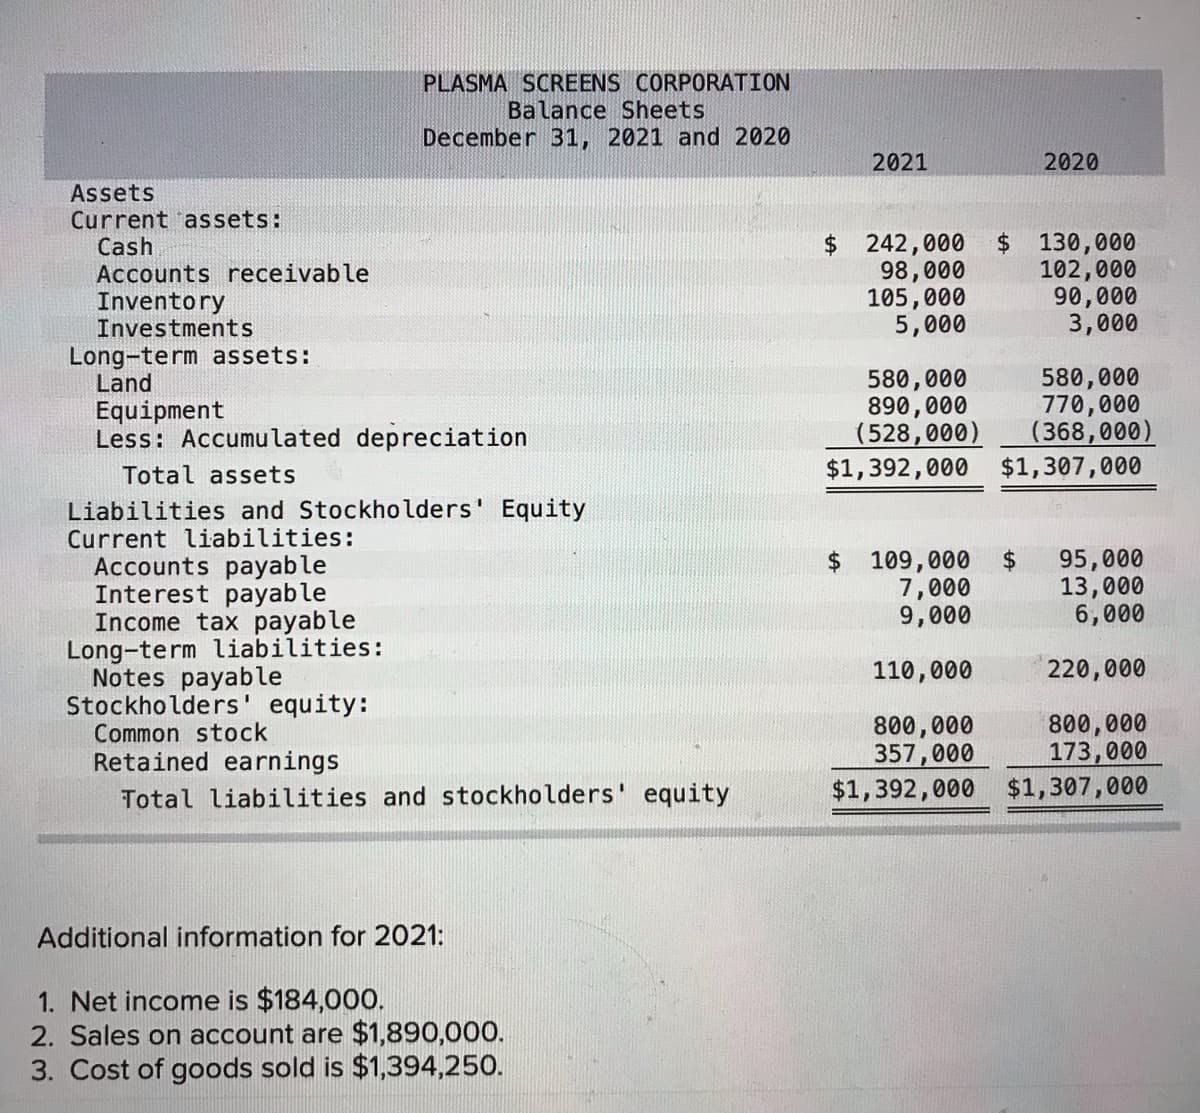 PLASMA SCREENS CORPORATION
Balance Sheets
December 31, 2021 and 2020
2021
2020
Assets
Current assets:
Cash
Accounts receivable
Inventory
Investments
$242,000
98,000
105,000
5,000
$ 130,000
102,000
90,000
3,000
Long-term assets:
Land
Equipment
Less: Accumulated depreciation
580,000
890,000
(528,000)
$1,392,000
580,000
770,000
(368,000)
$1,307,000
Total assets
Liabilities and Stockholders' Equity
Current liabilities:
Accounts payable
Interest payab le
Income tax payable
Long-term liabilities:
Notes payable
Stockholders' equity:
Common stock
Retained earnings
$ 109,000
7,000
9,000
95,000
13,000
6,000
2$
110,000
220,000
800,000
357,000
$1,392,000 $1,307,000
800,000
173,000
Total liabilities and stockholders' equity
Additional information for 2021:
1. Net income is $184,000.
2. Sales on account are $1,890,000.
3. Cost of goods sold is $1,394,250.
